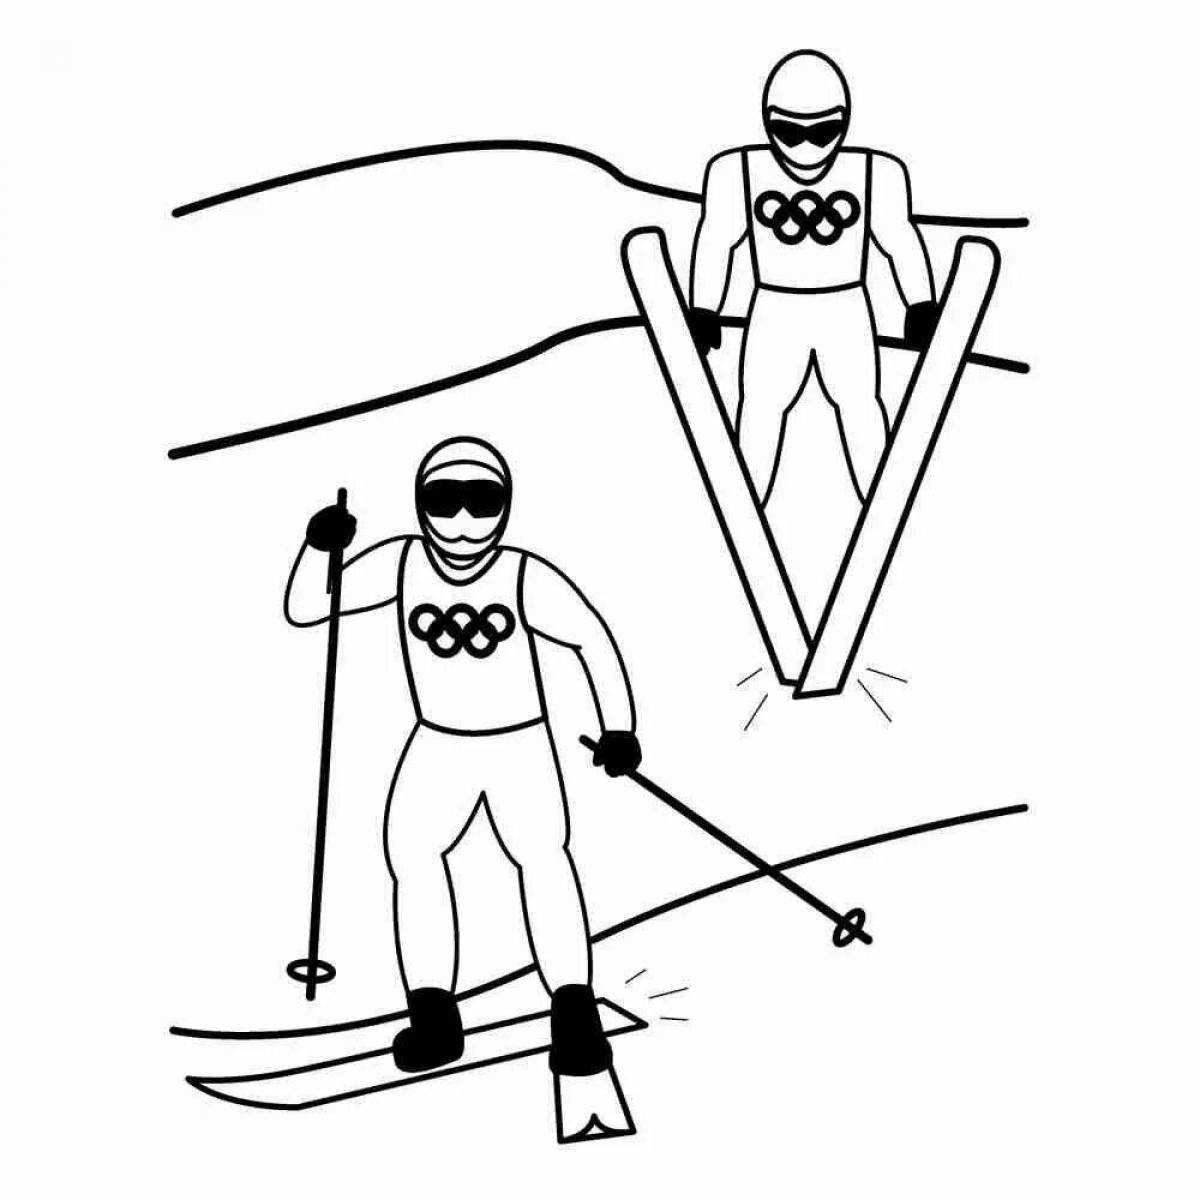 Colorful skiing coloring book